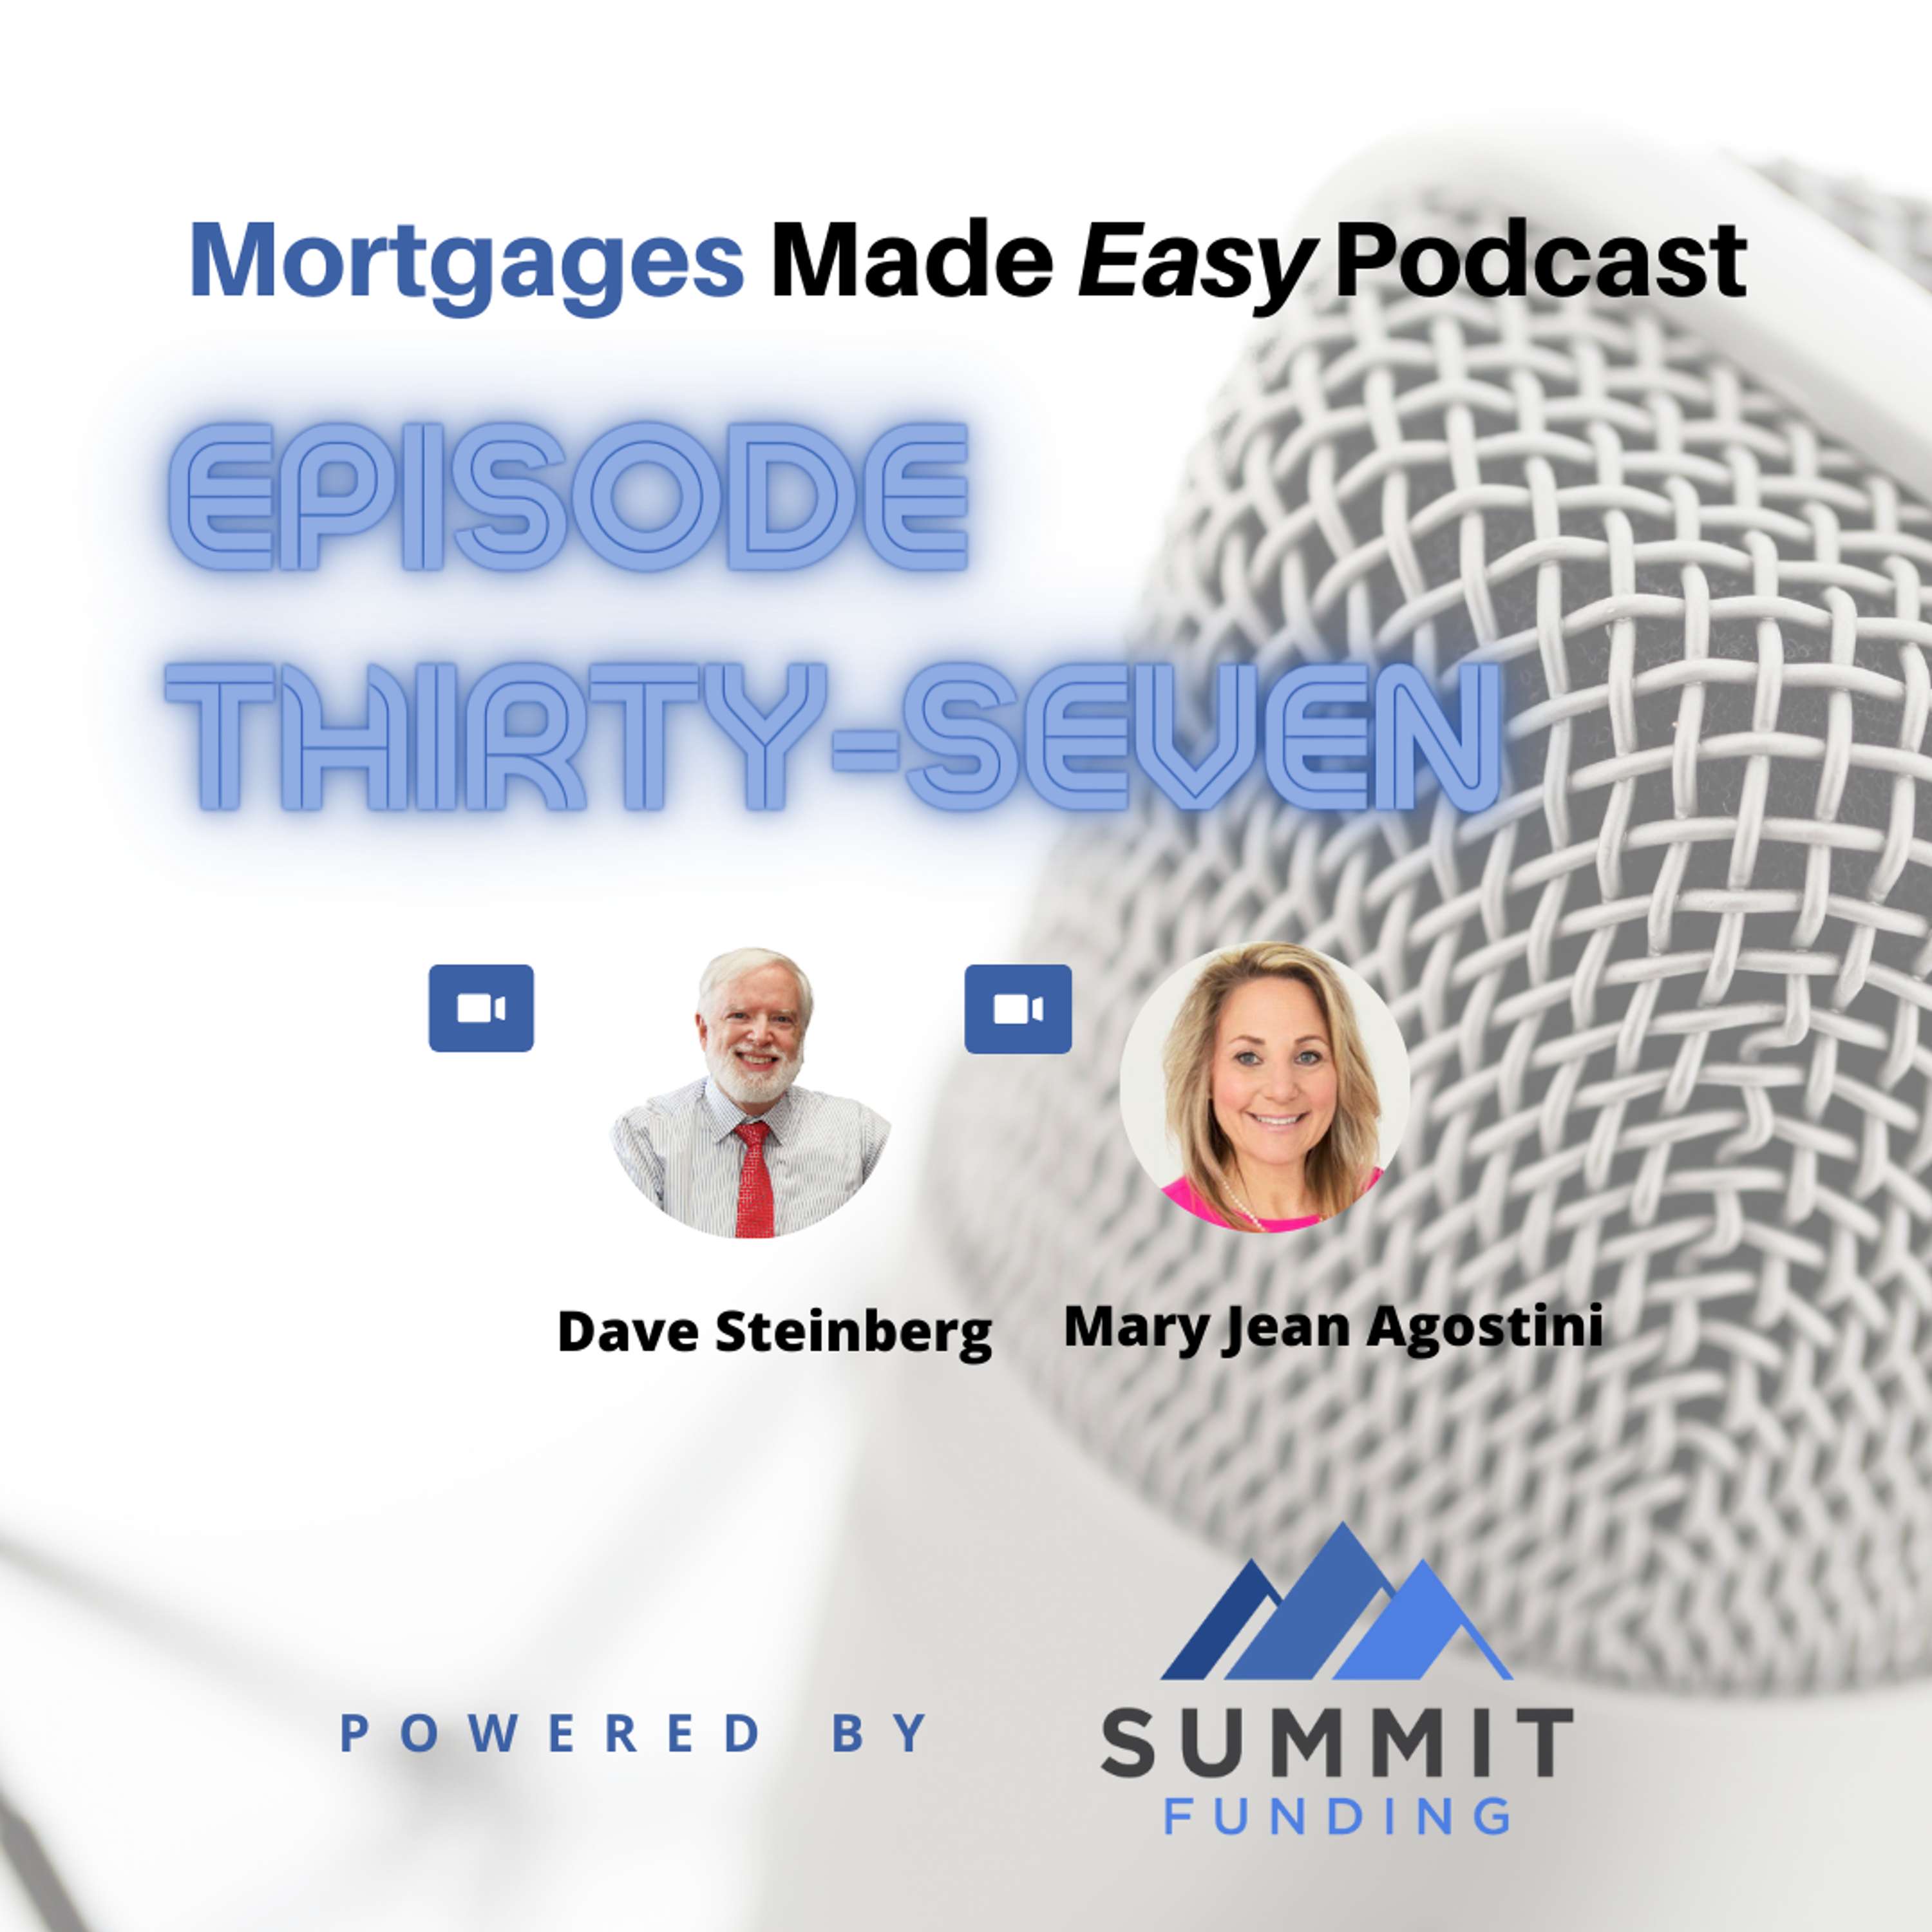 Episode 37: Mortgage vs Cash Offer: Which is better? ft. Mary Jean Agostini (Part 2)